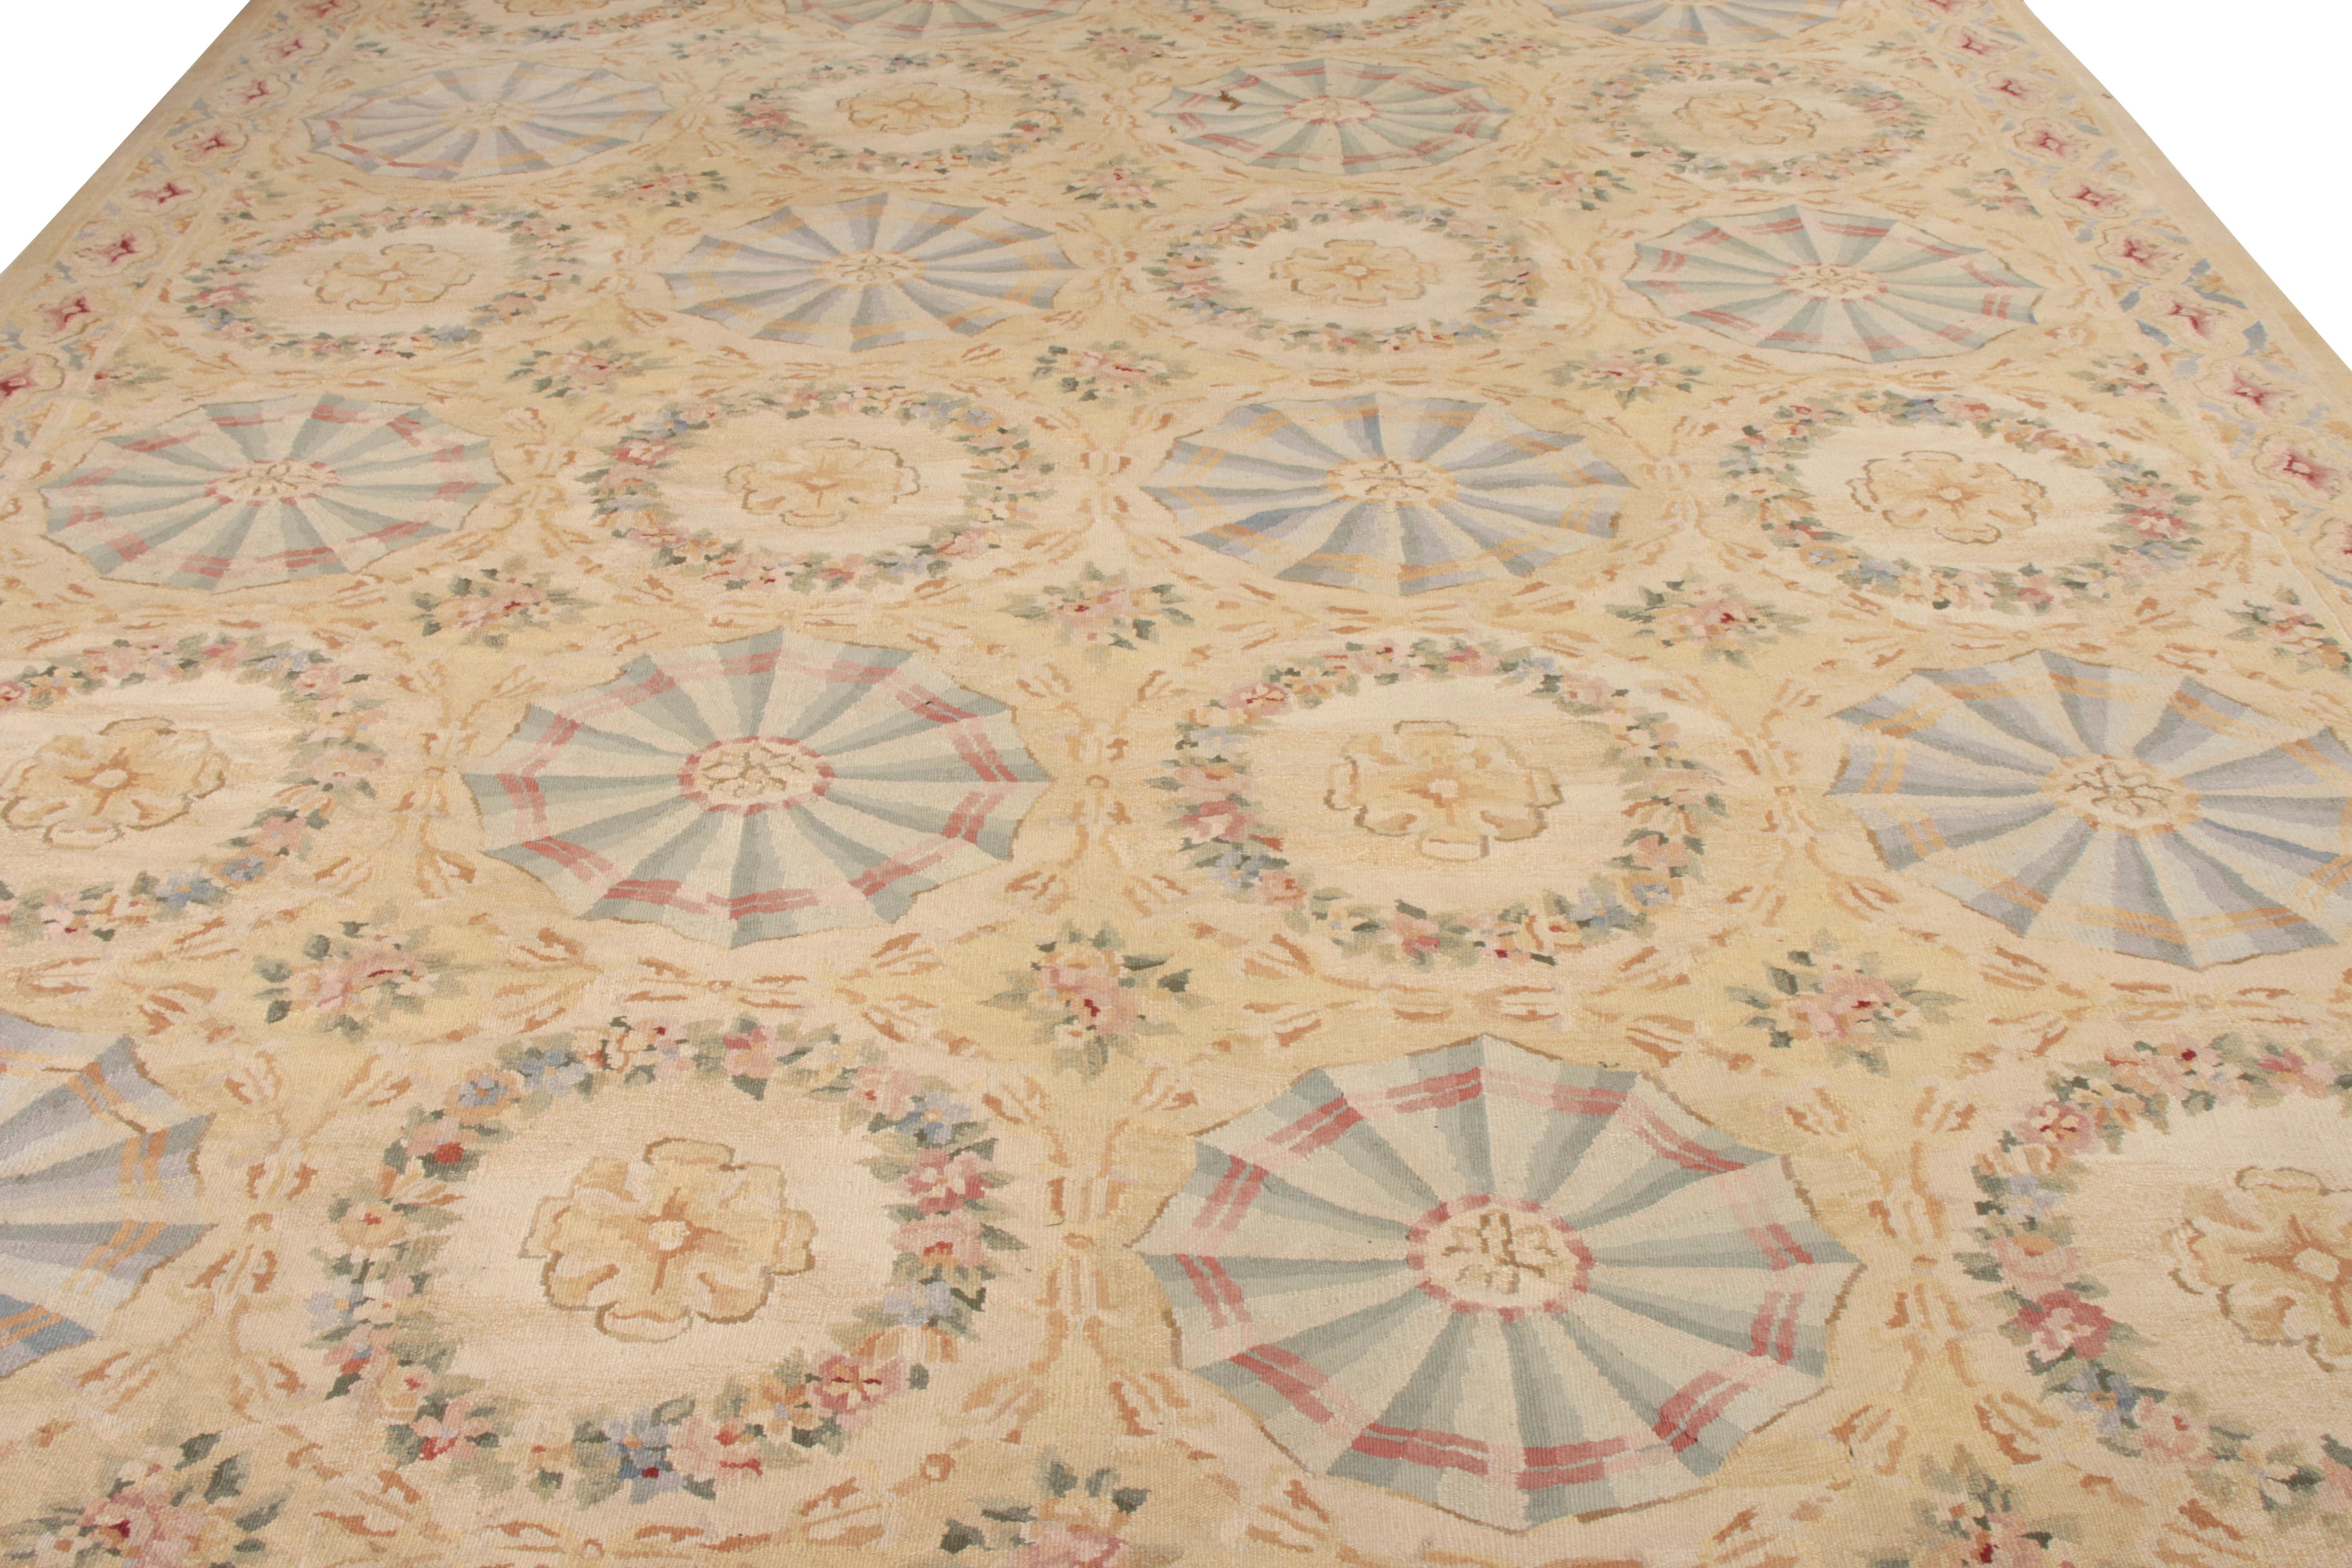 Chinese Rug & Kilim's Aubusson Style Flat-Weave Rug in Beige Gold Floral Pattern